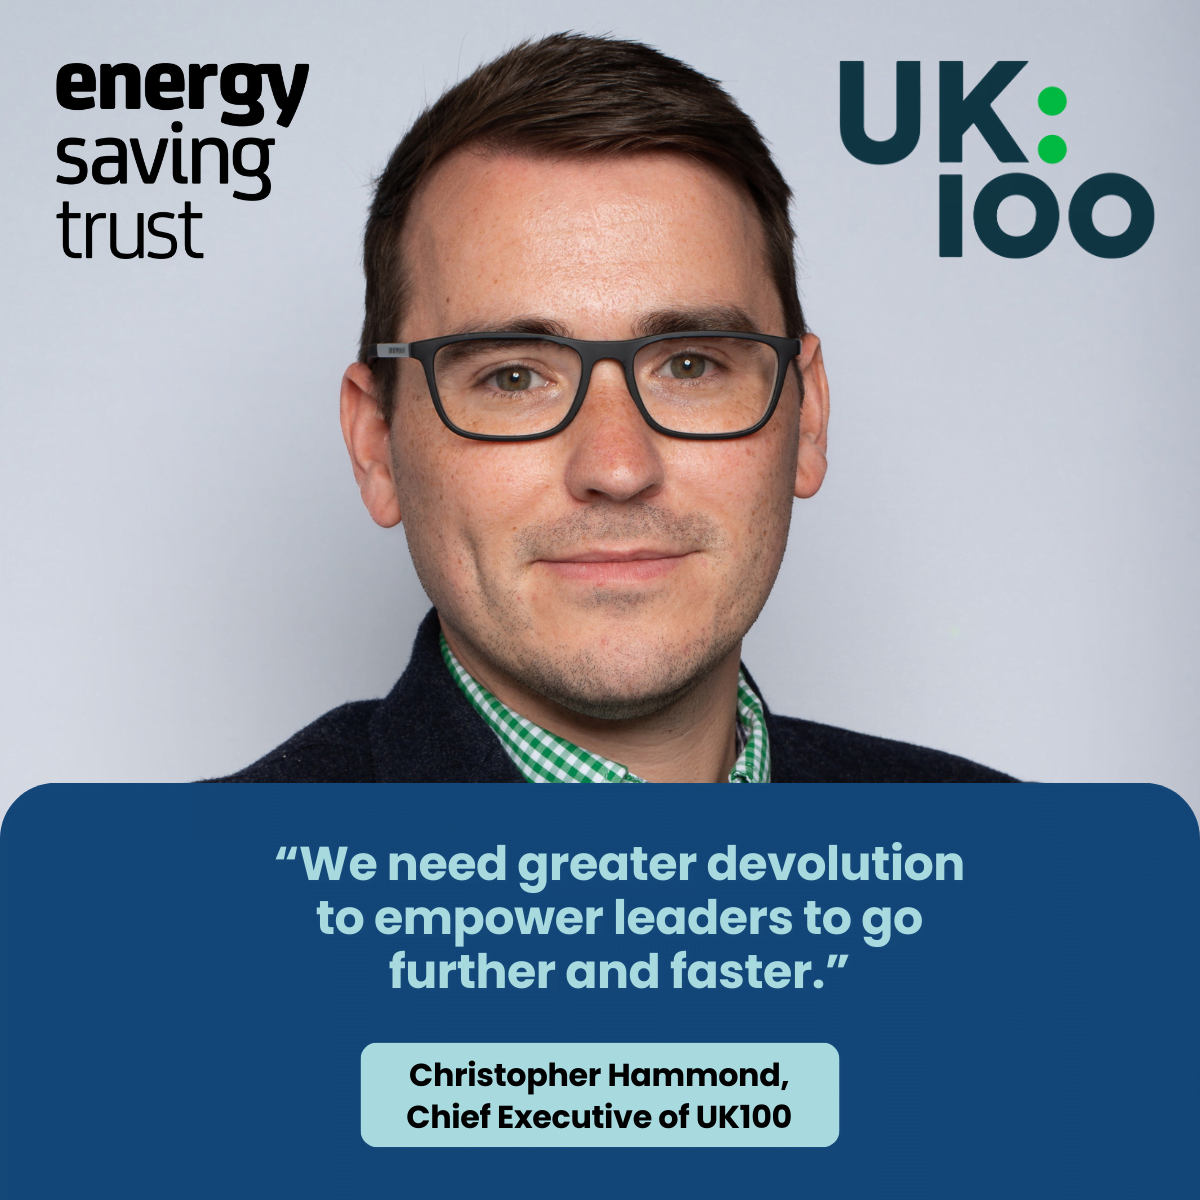 Quote from UK100 CEO Christopher Hammond: "We need greater devolution to empower leaders to go further and faster."